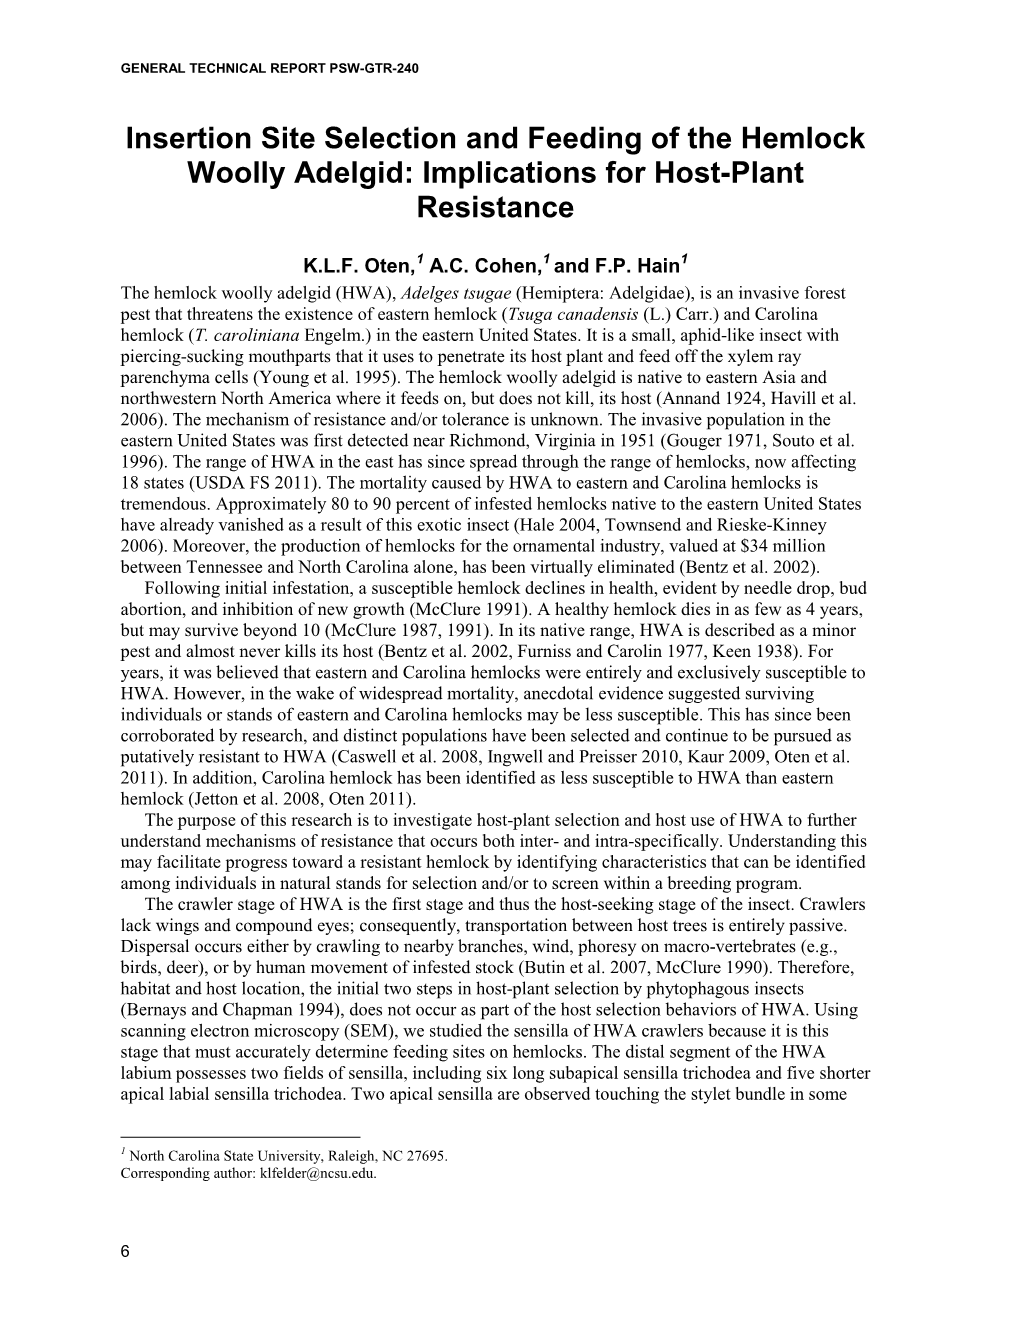 Insertion Site Selection and Feeding of the Hemlock Woolly Adelgid: Implications for Host-Plant Resistance